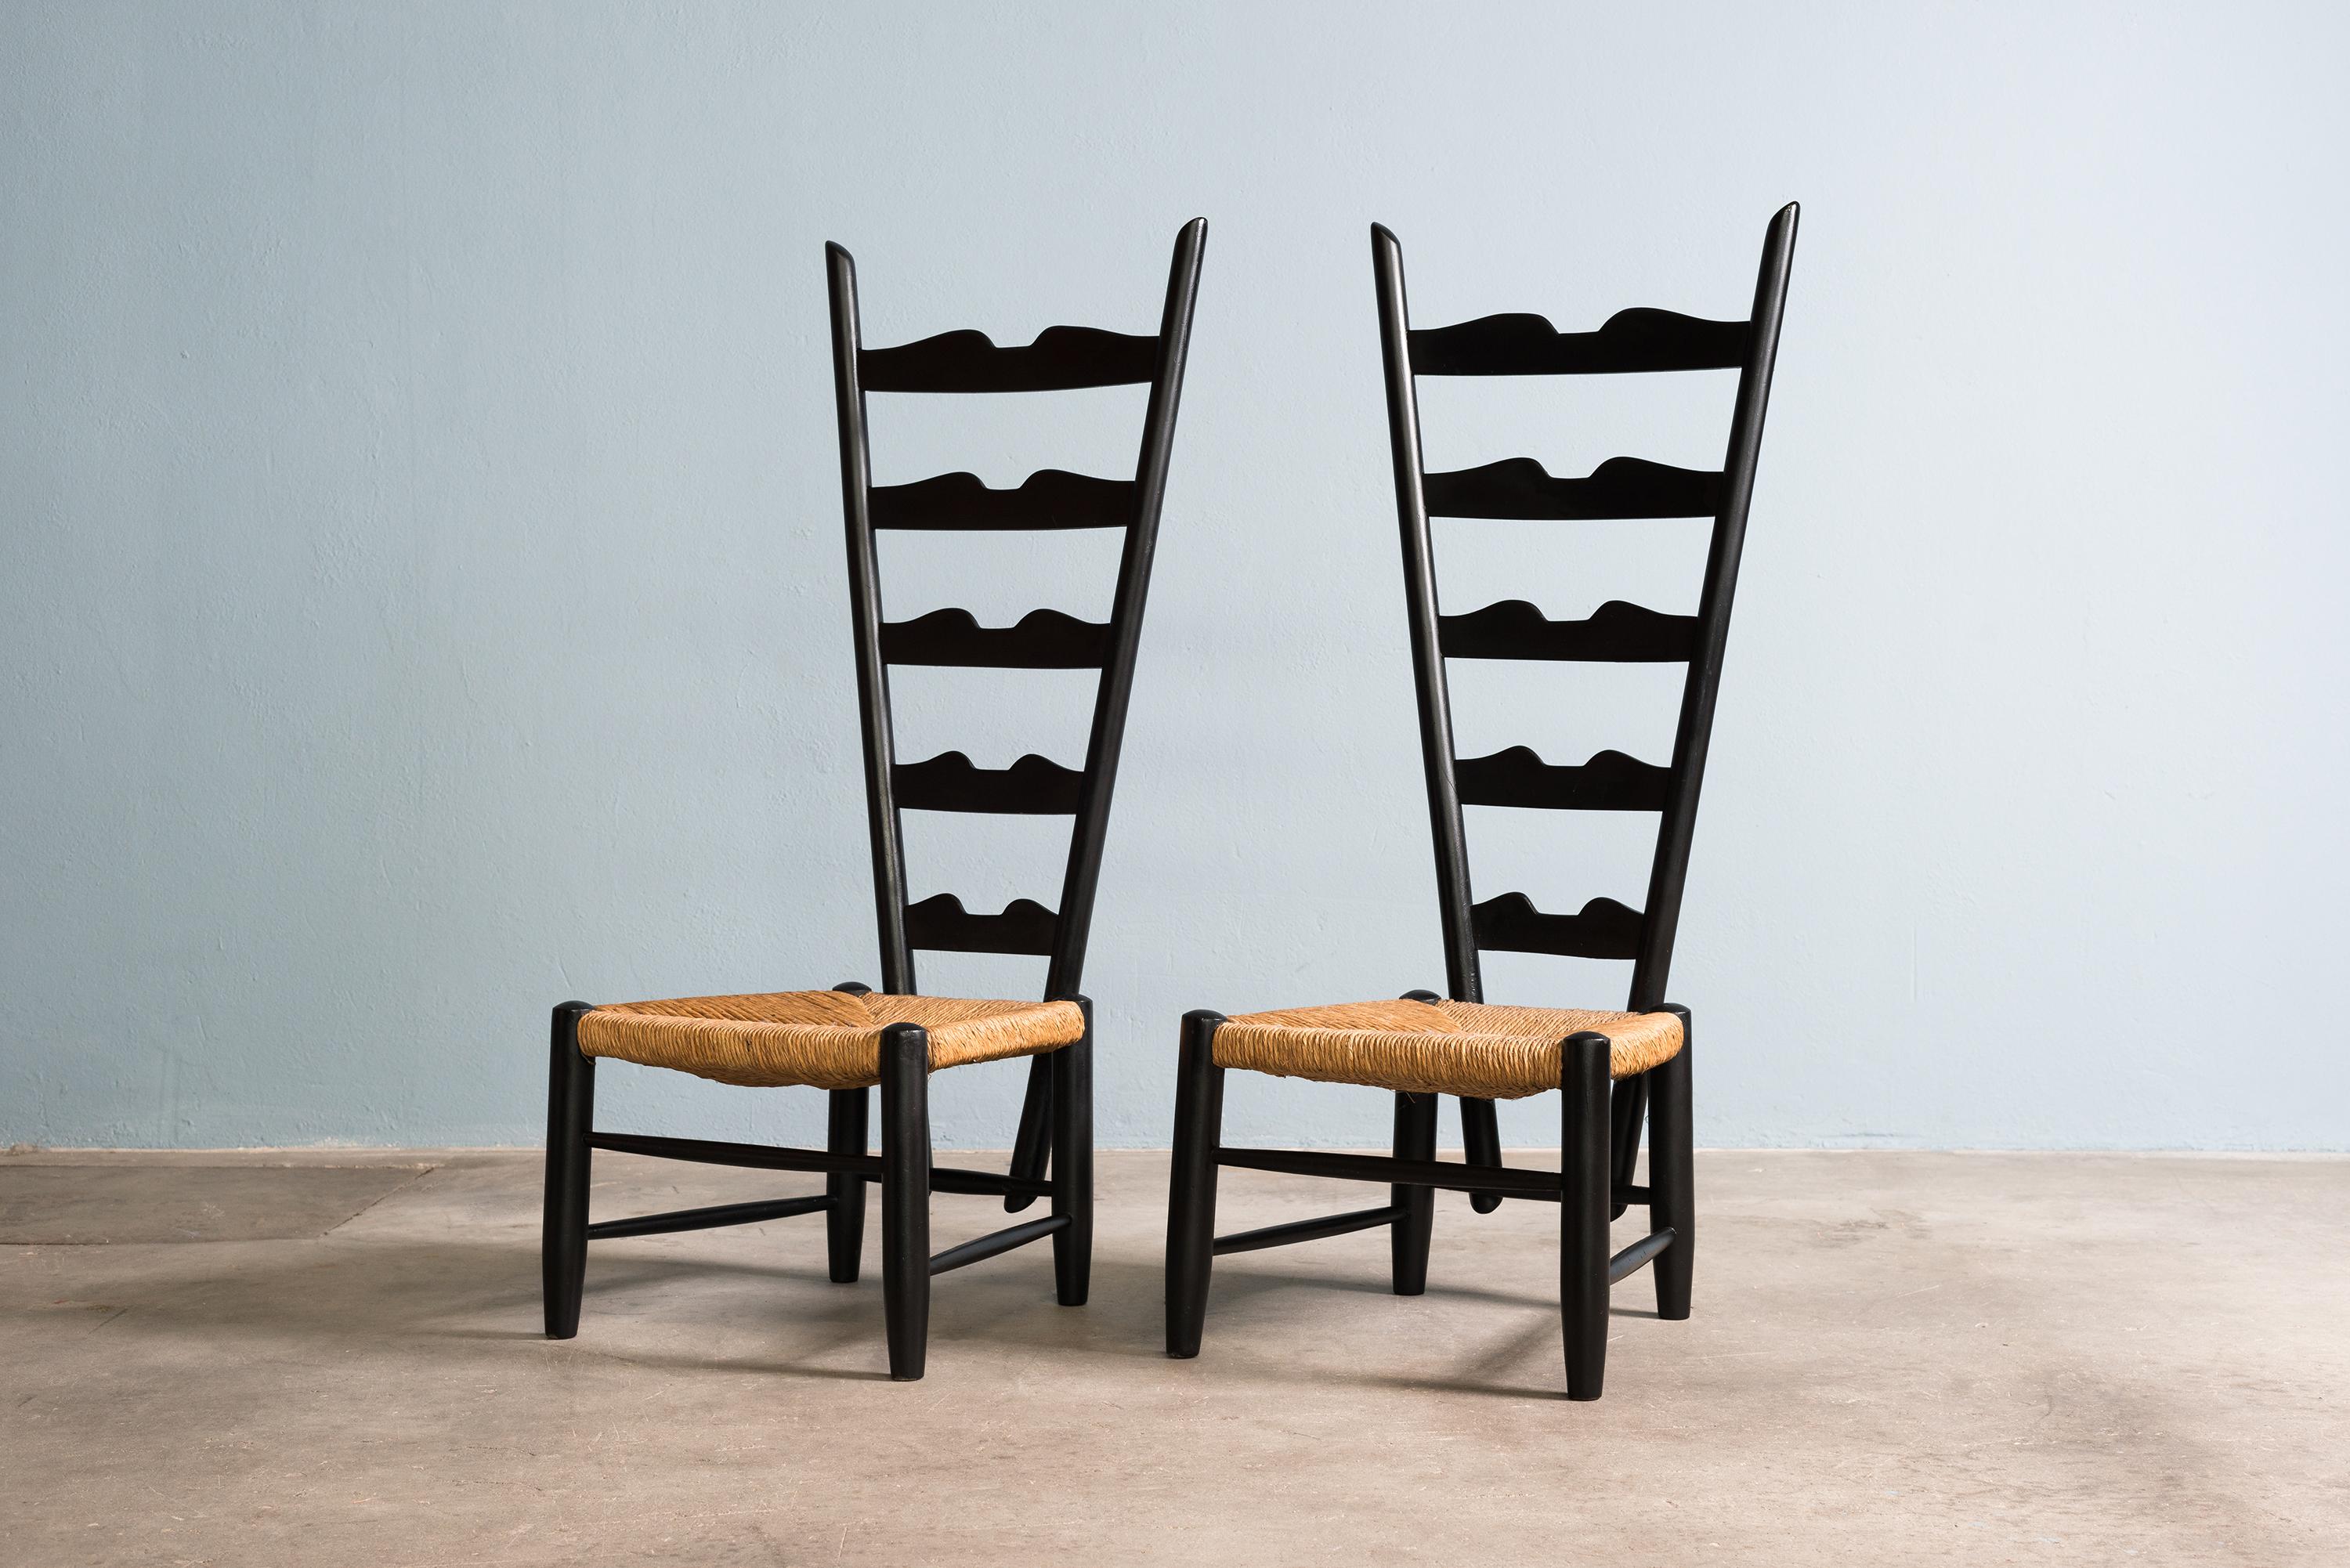 Pair of fireside chairs by Gio Ponti for Casa e Giardino, Italy, circa 1939
Excellent condition.